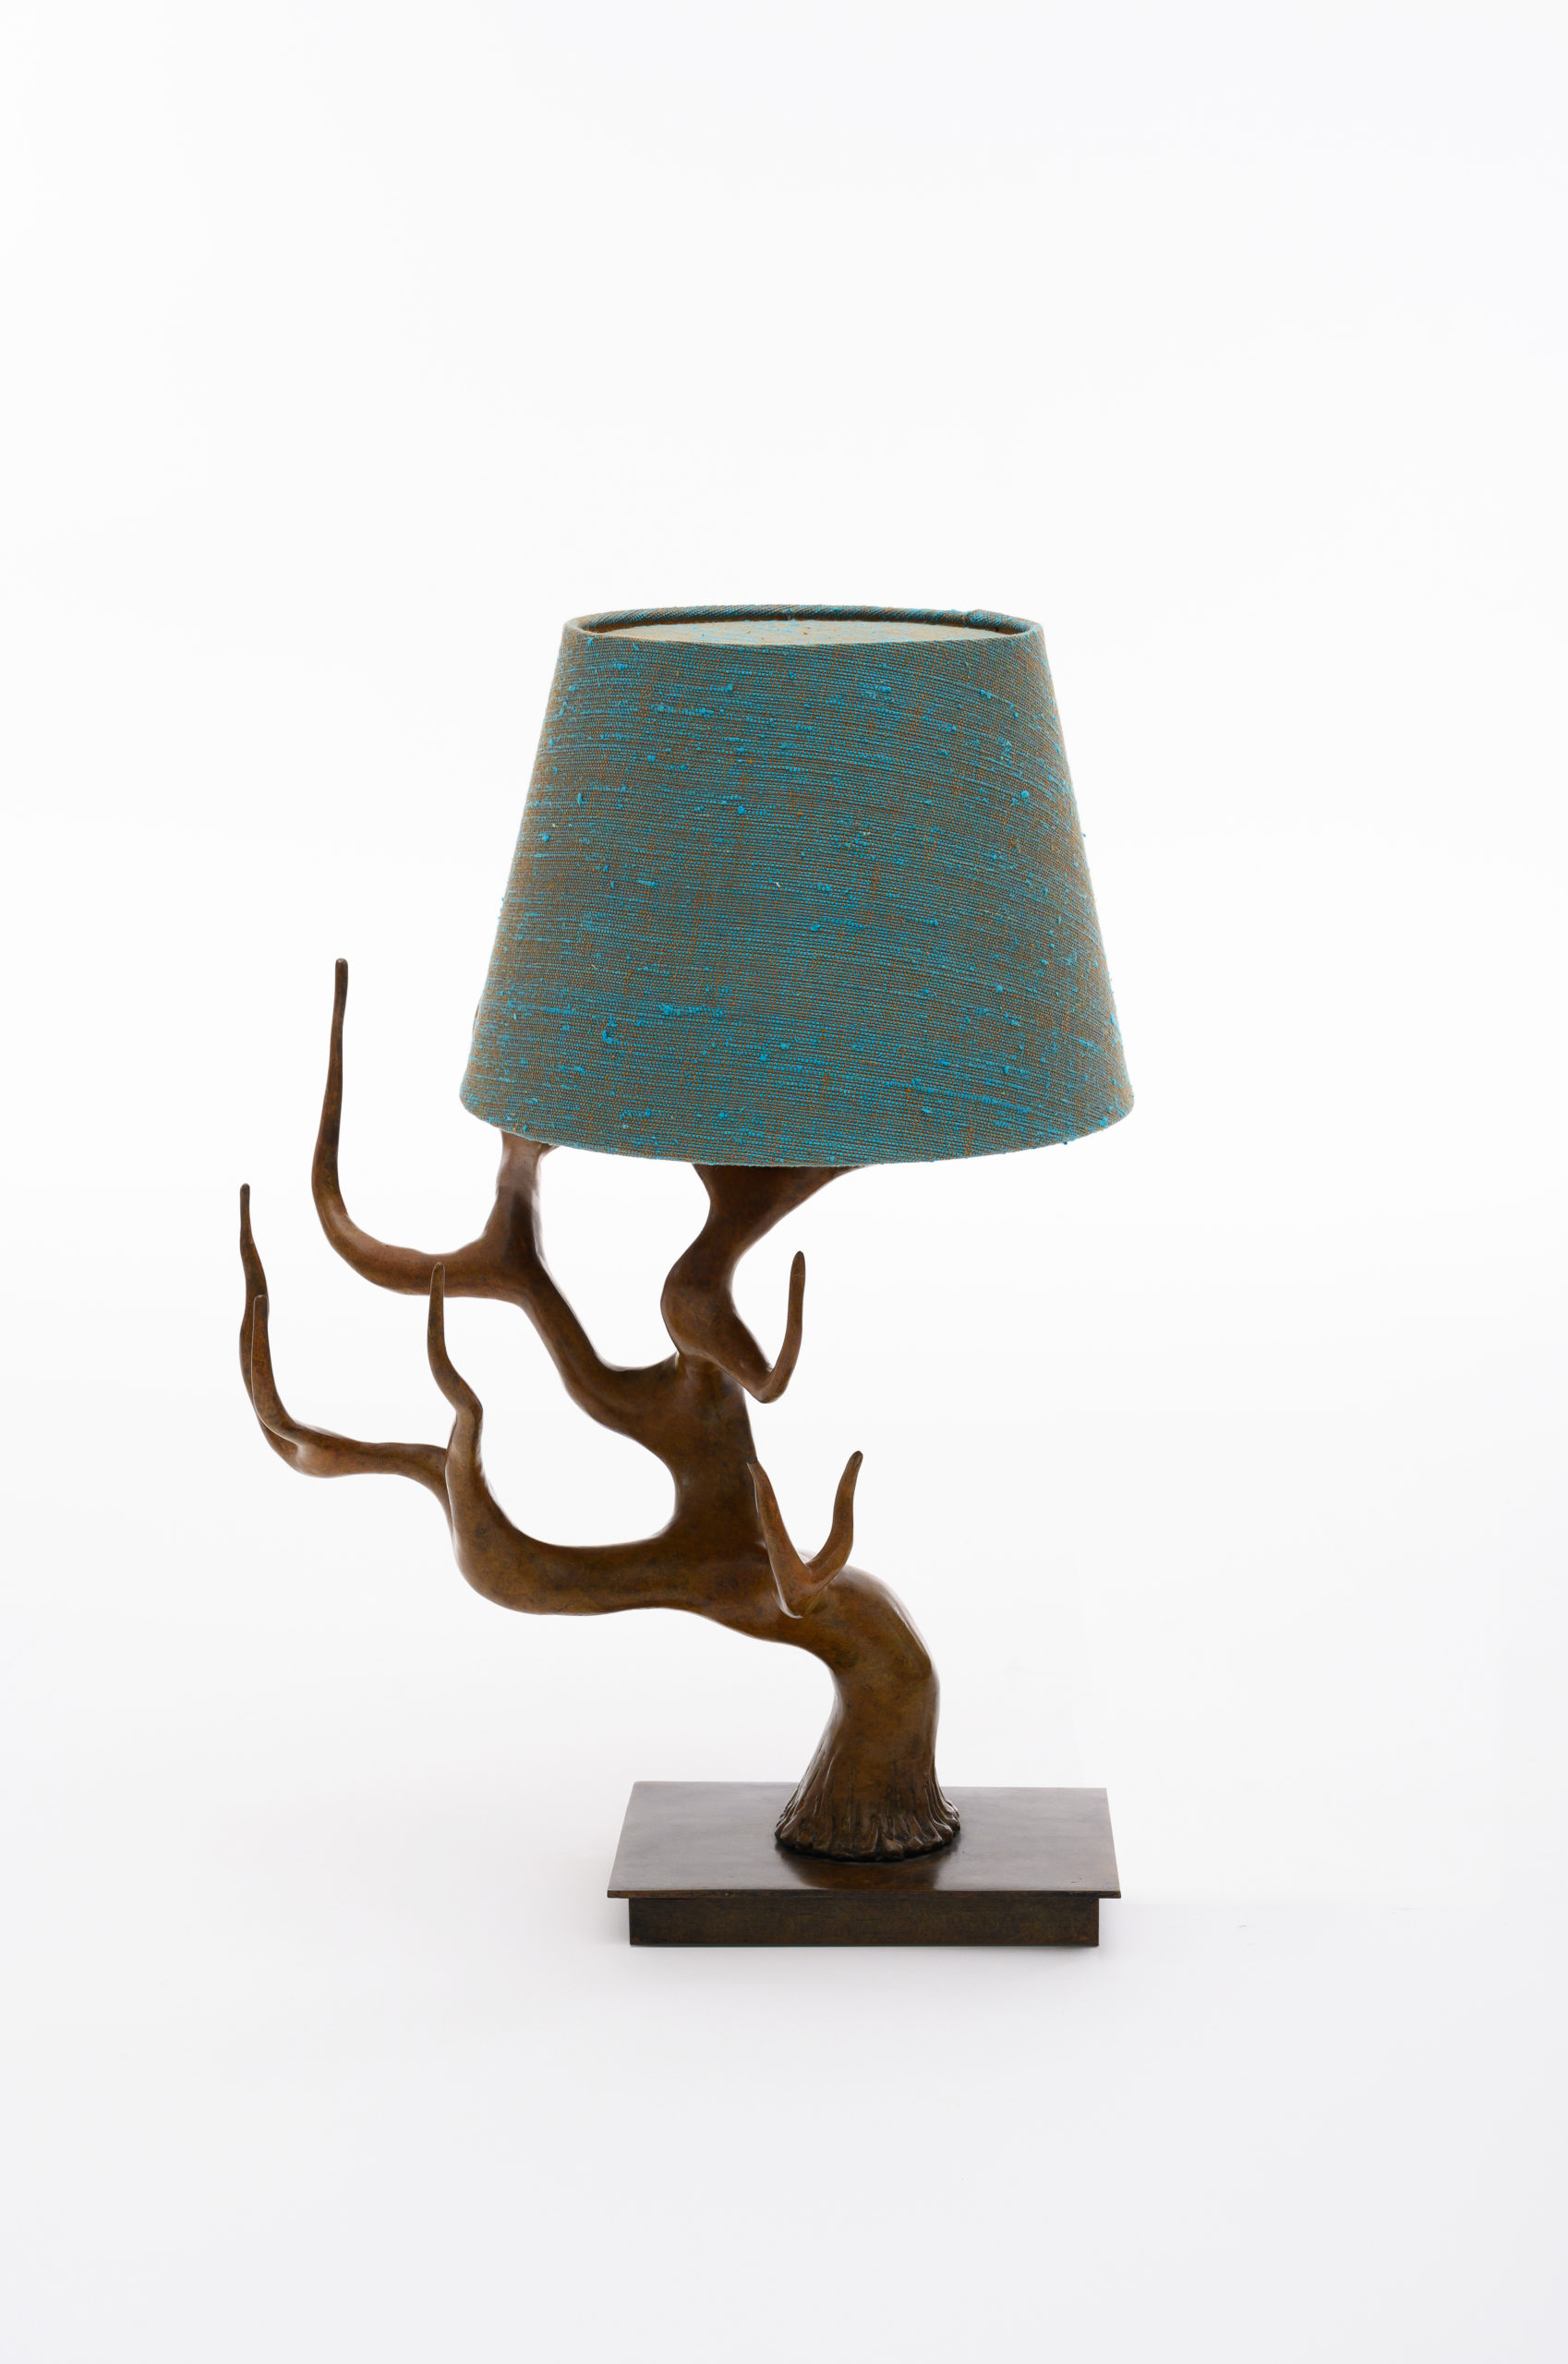 NYDC_WNWN_products_david_sutherland_elan_atelier_Cervus_Table_Lamp_PHS_0399